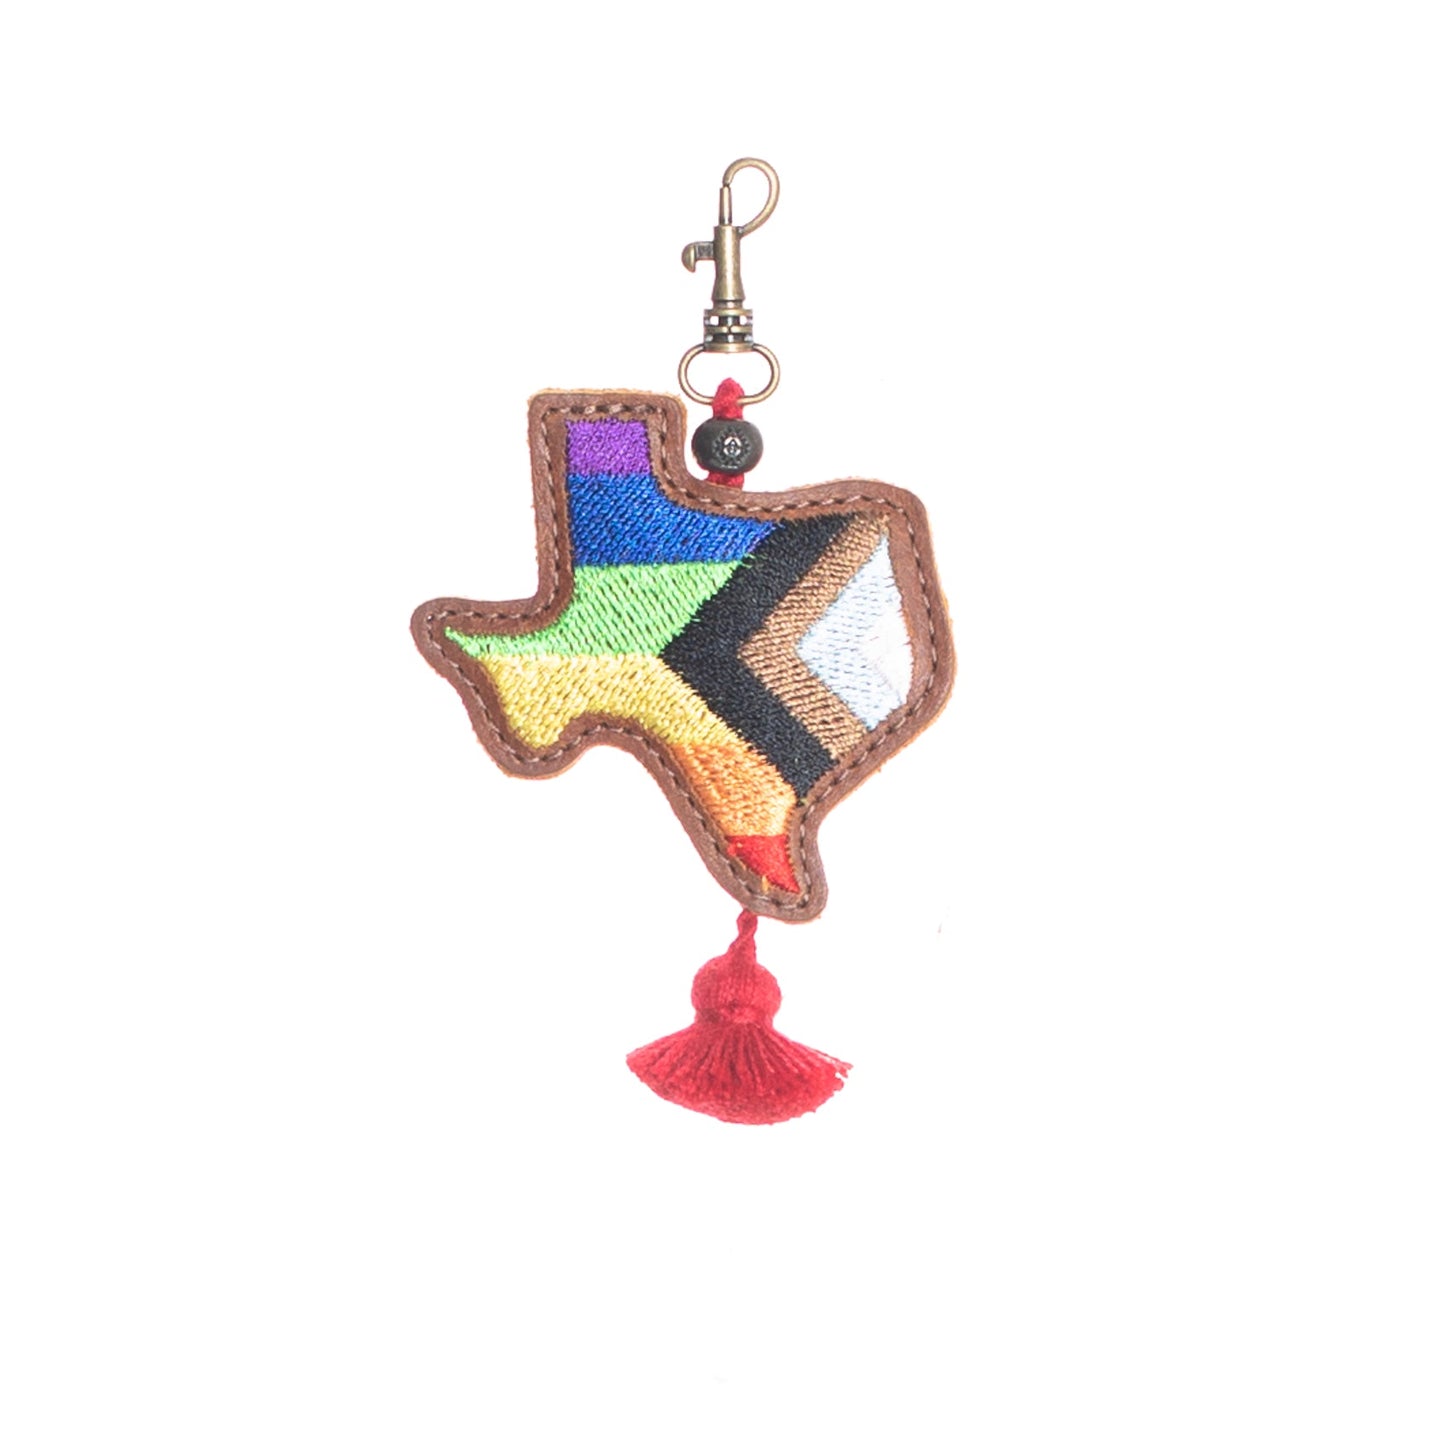 TEXAS PRIDE - LEATHER CHARM WITH TASSEL